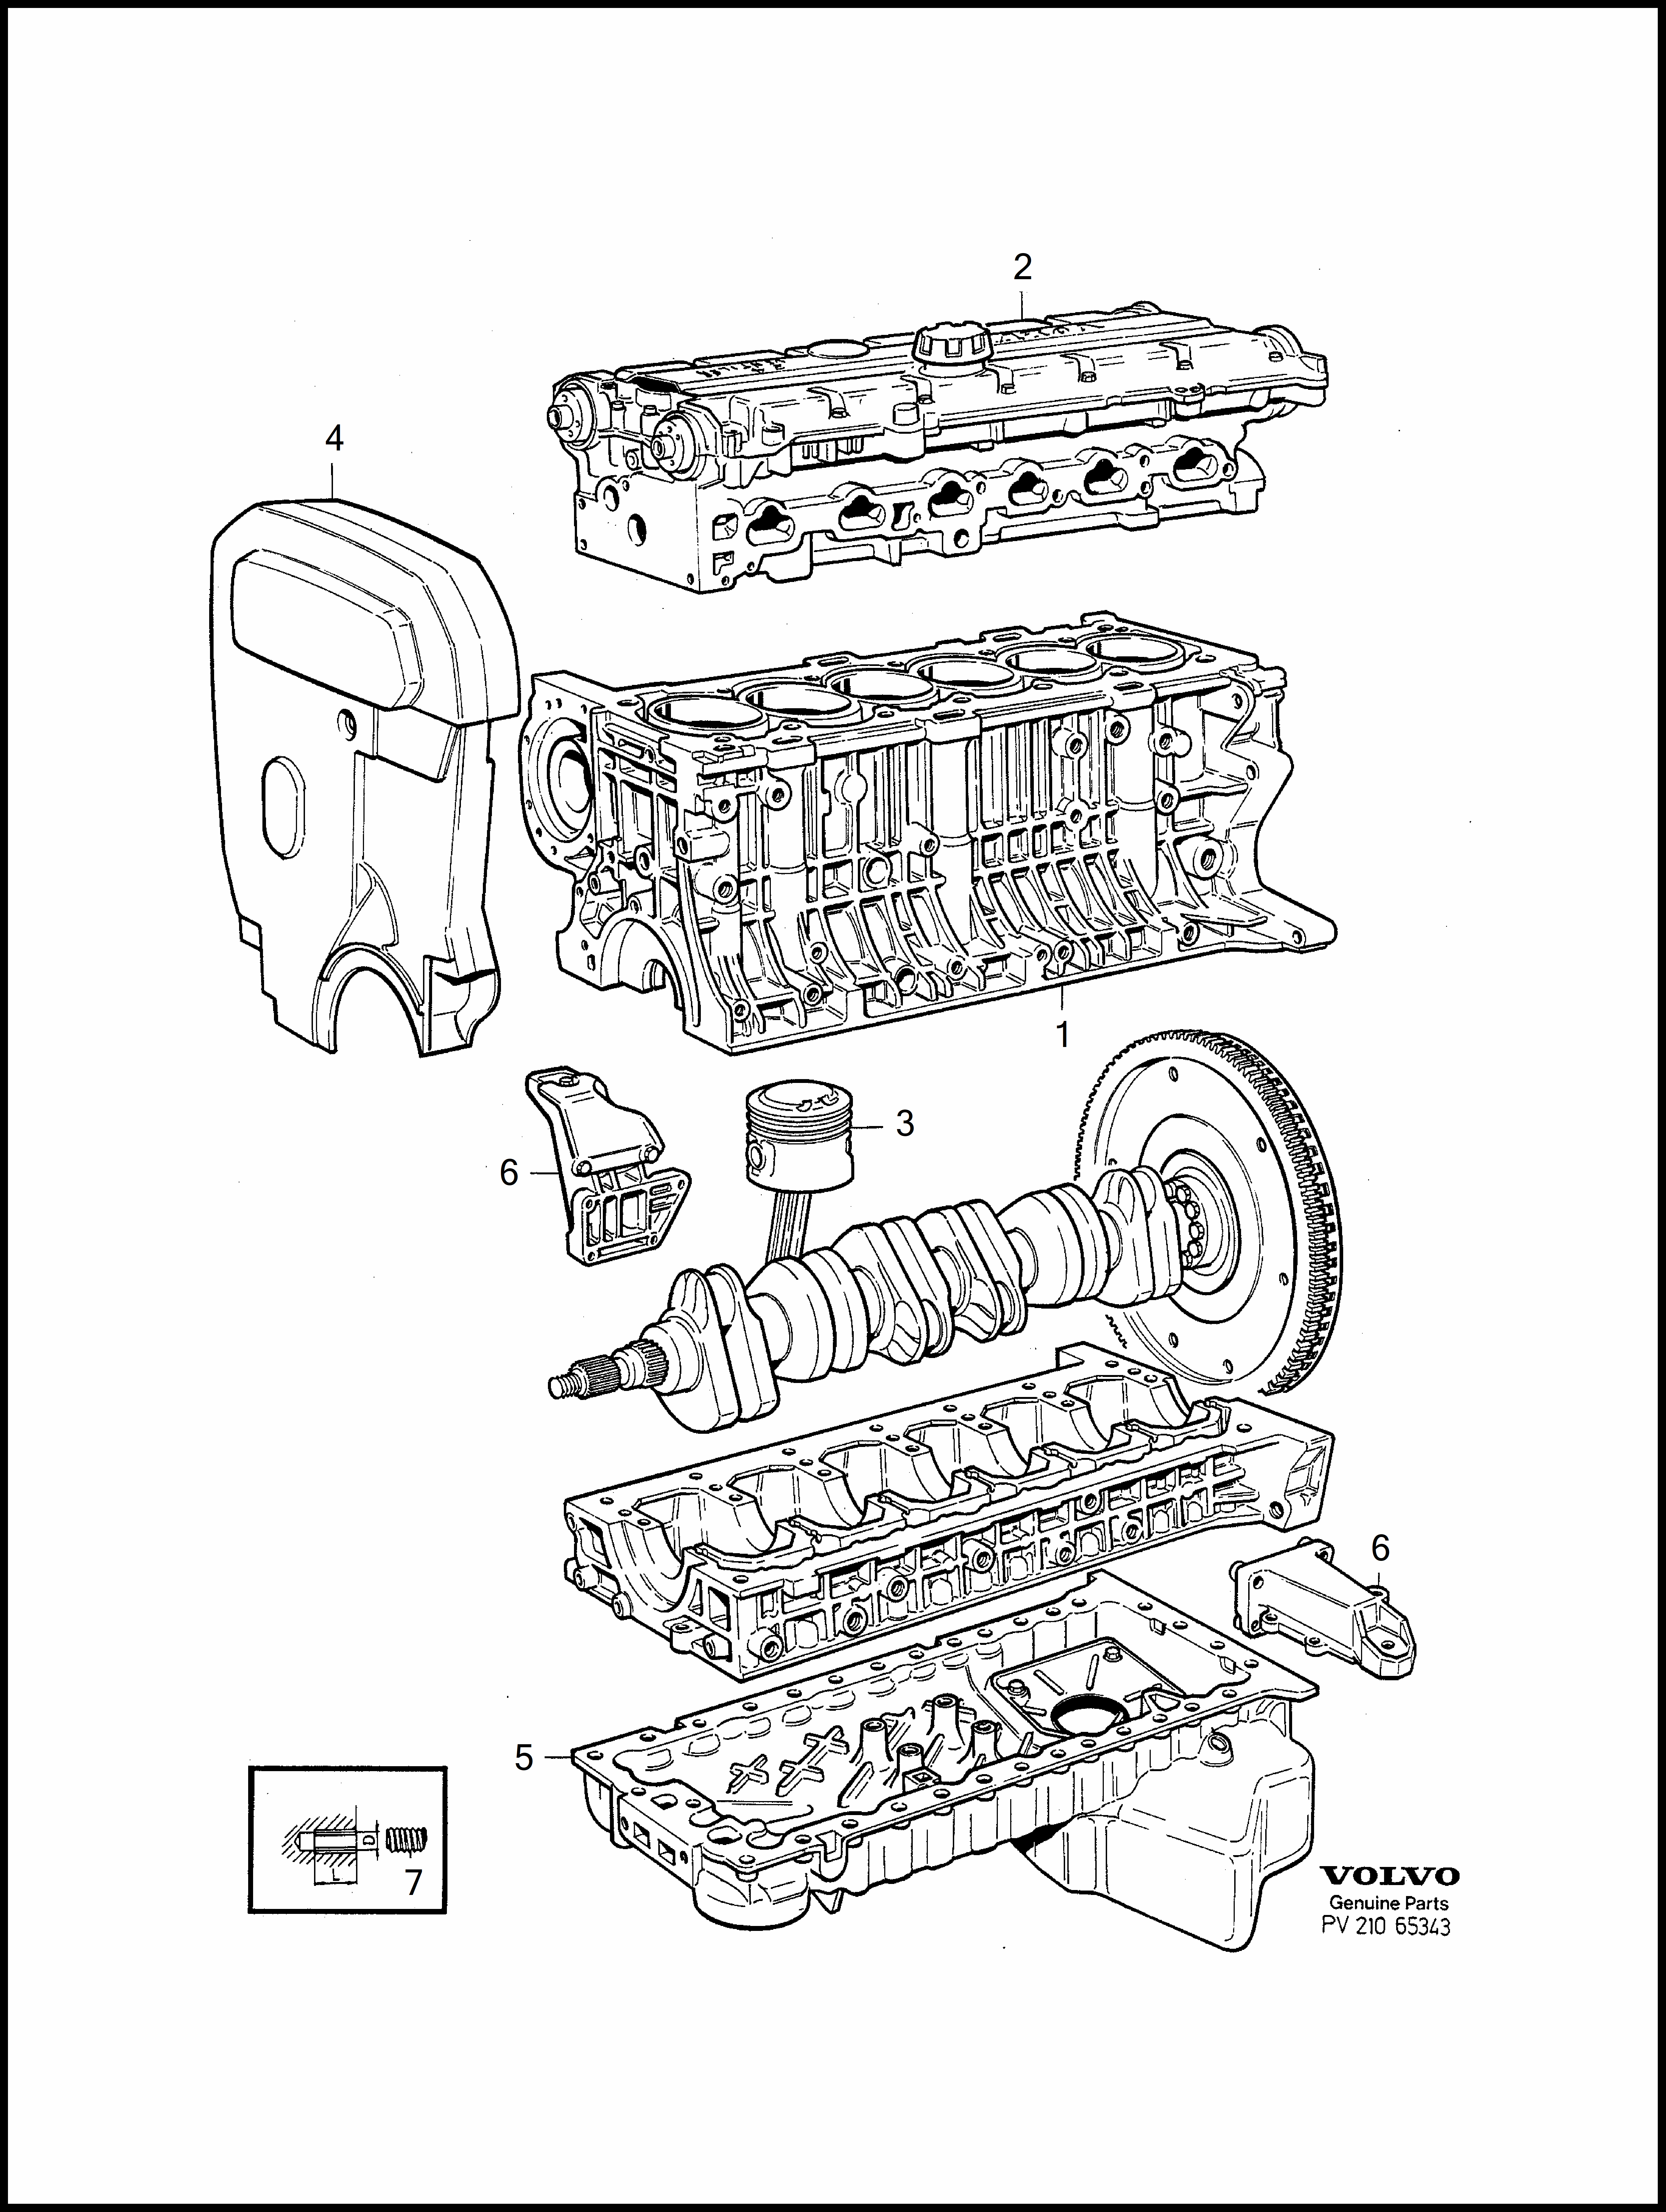 engine with fittings dla Volvo 960 960